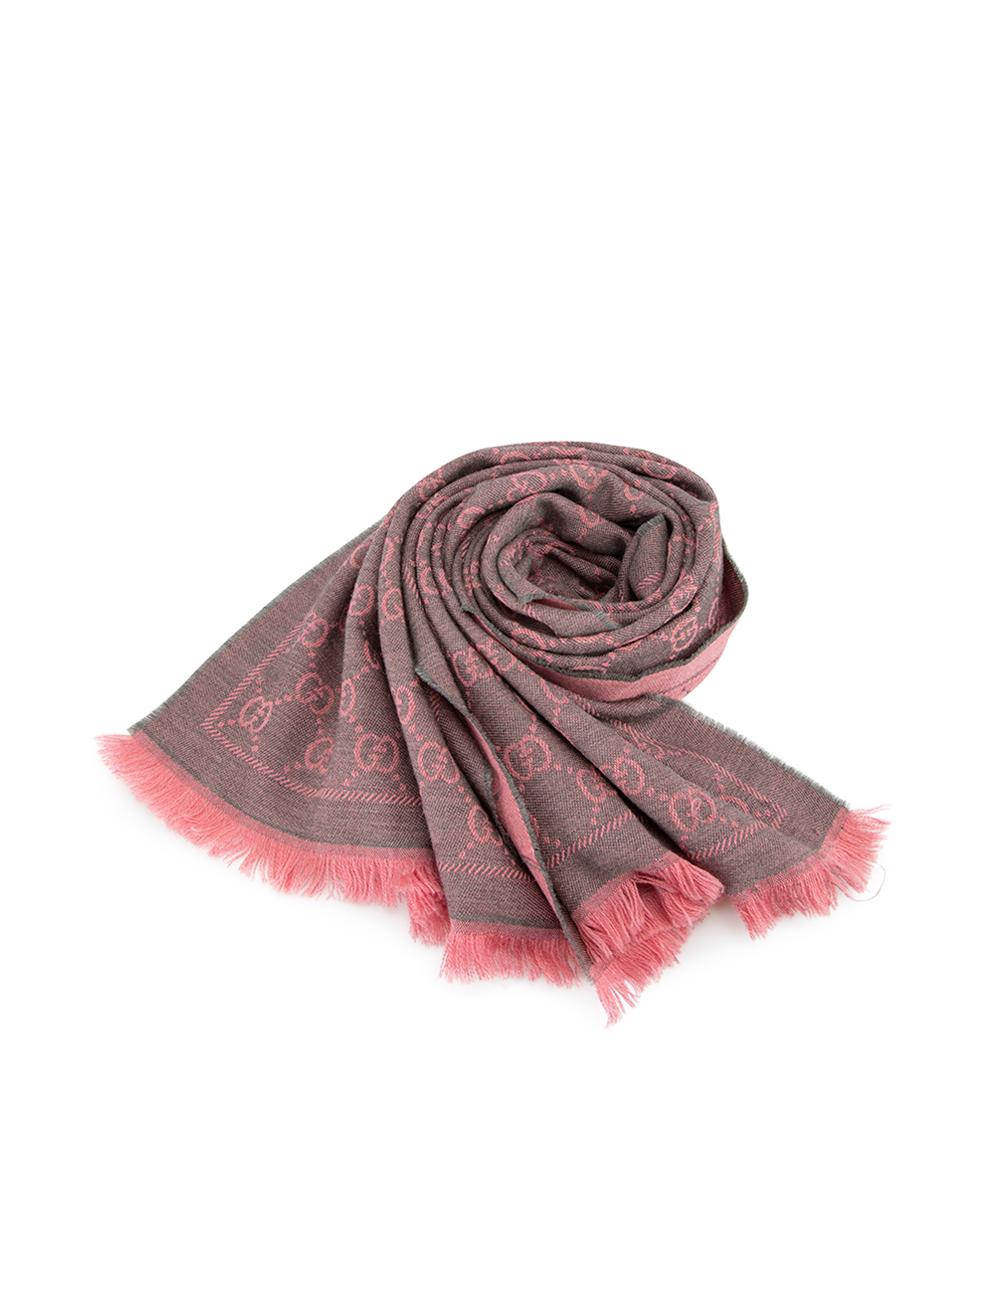 CONDITION is Very good. Minimal wear to scarf is evident. Minimal loose threads and pulls on this used Gucci designer resale item. 



Details


Pink and grey

Wool

Scarf

GG monogram pattern

Fringed hemline





Made in Italy



Composition

NO